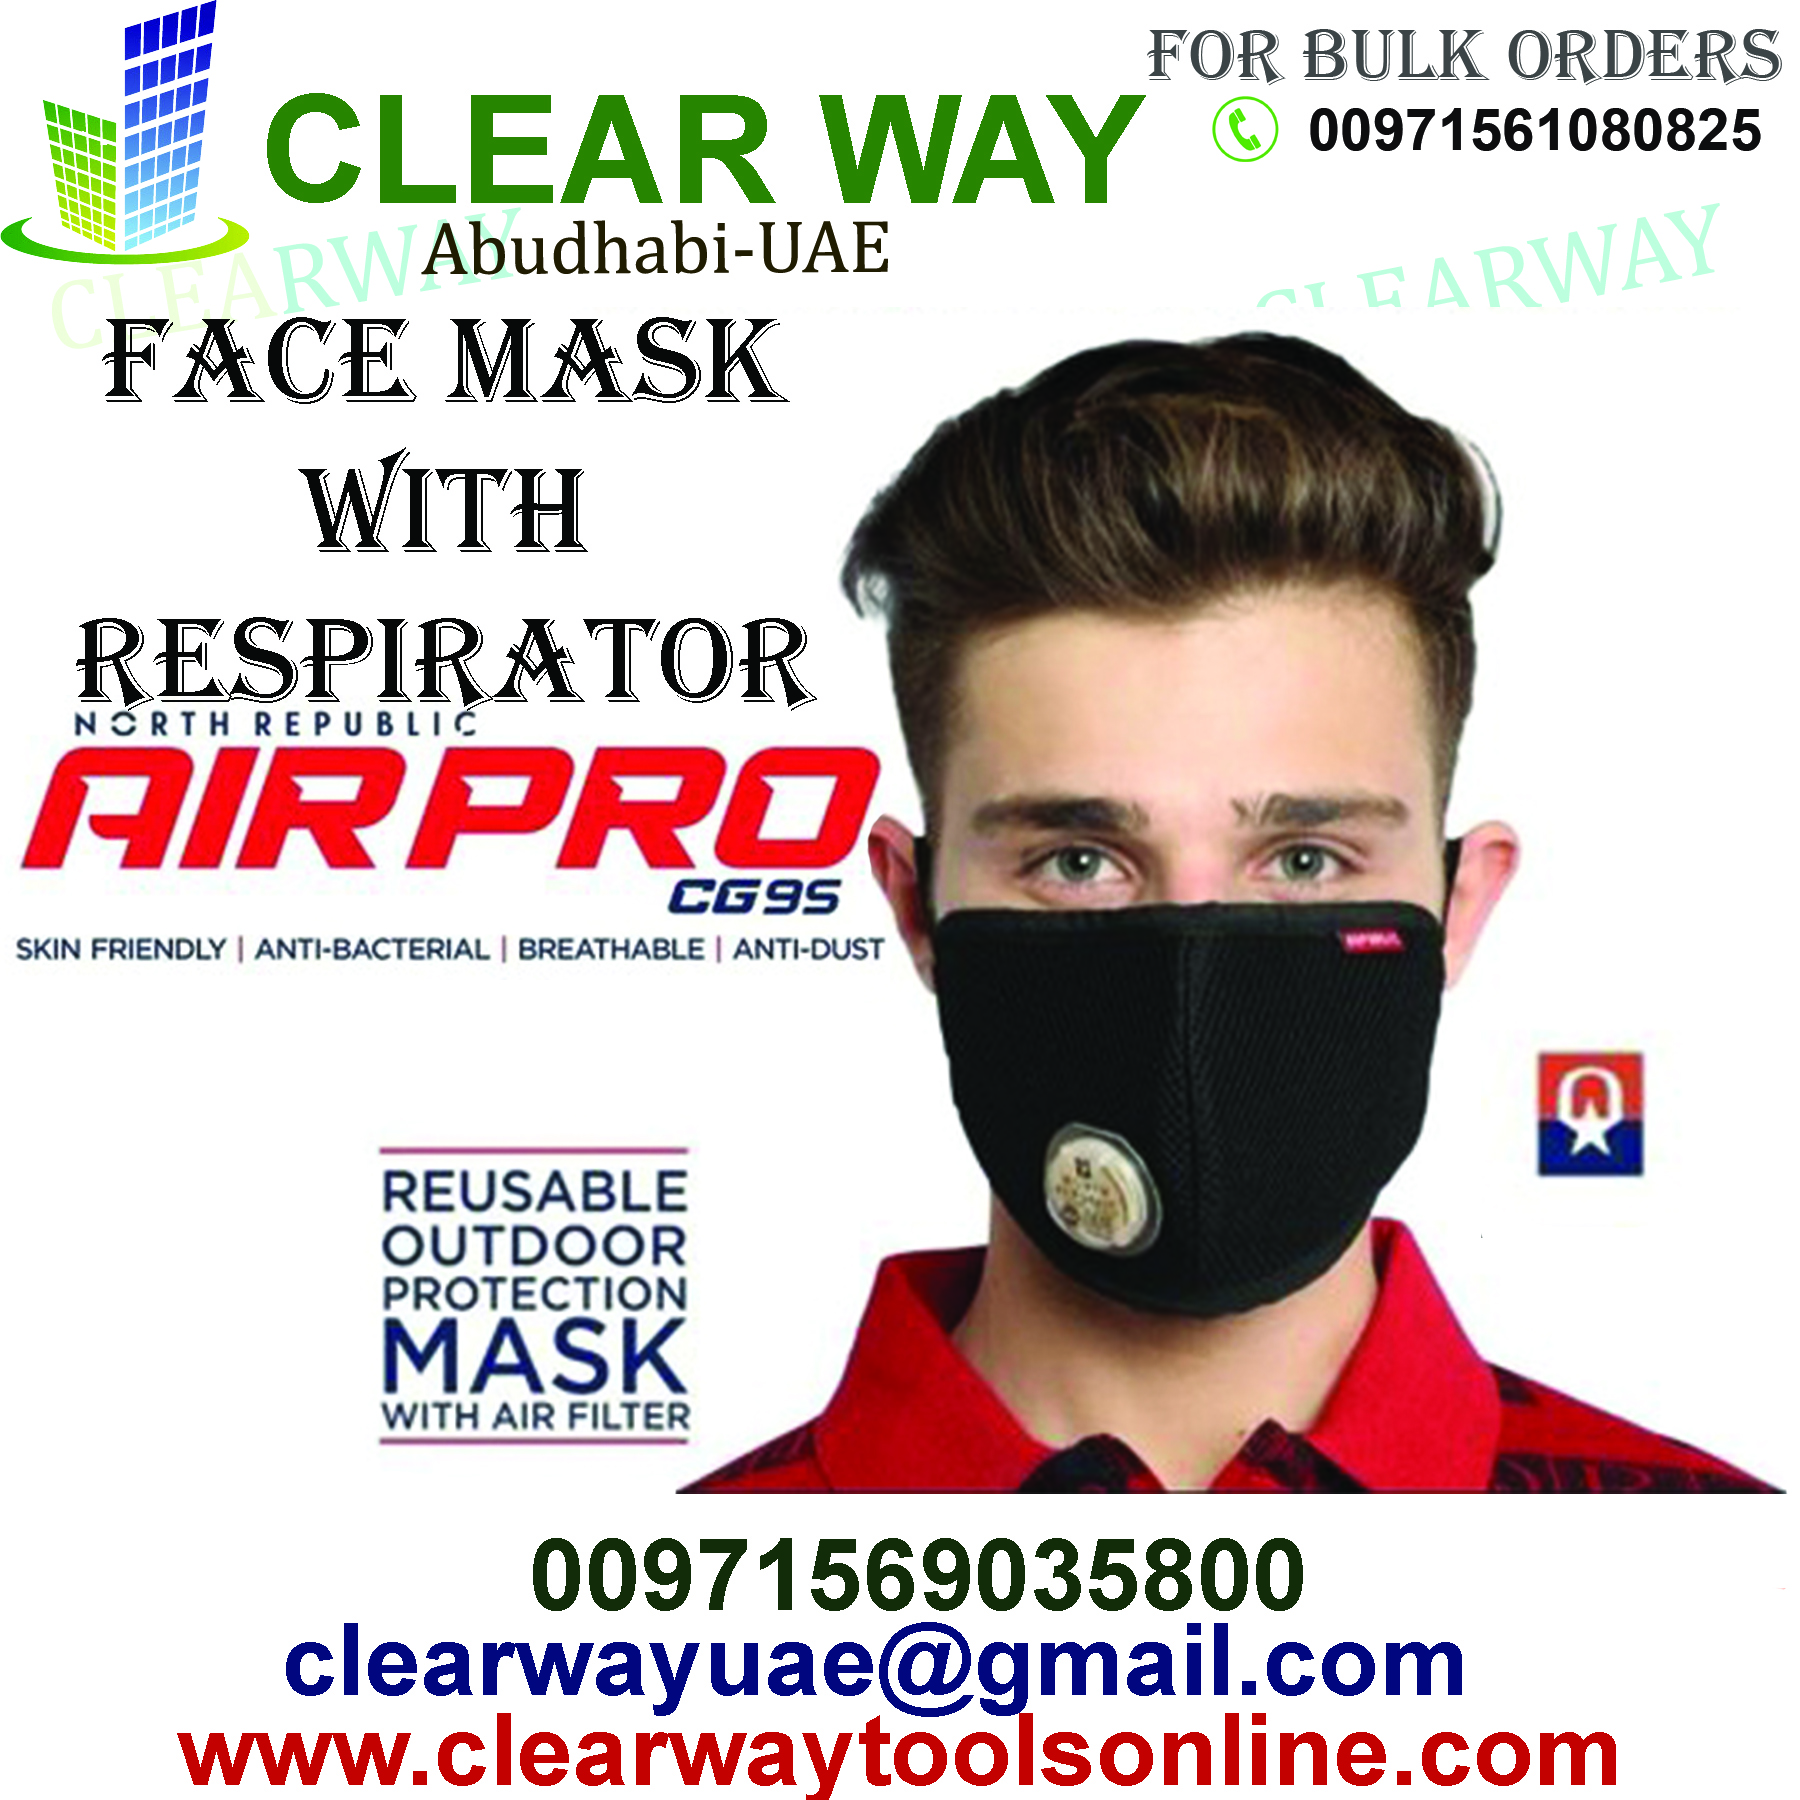 FACE MASK WITH RESPIRATOR DEALER IN MUSSAFAH , ABUDHABI , UAE BY CLEARWAY